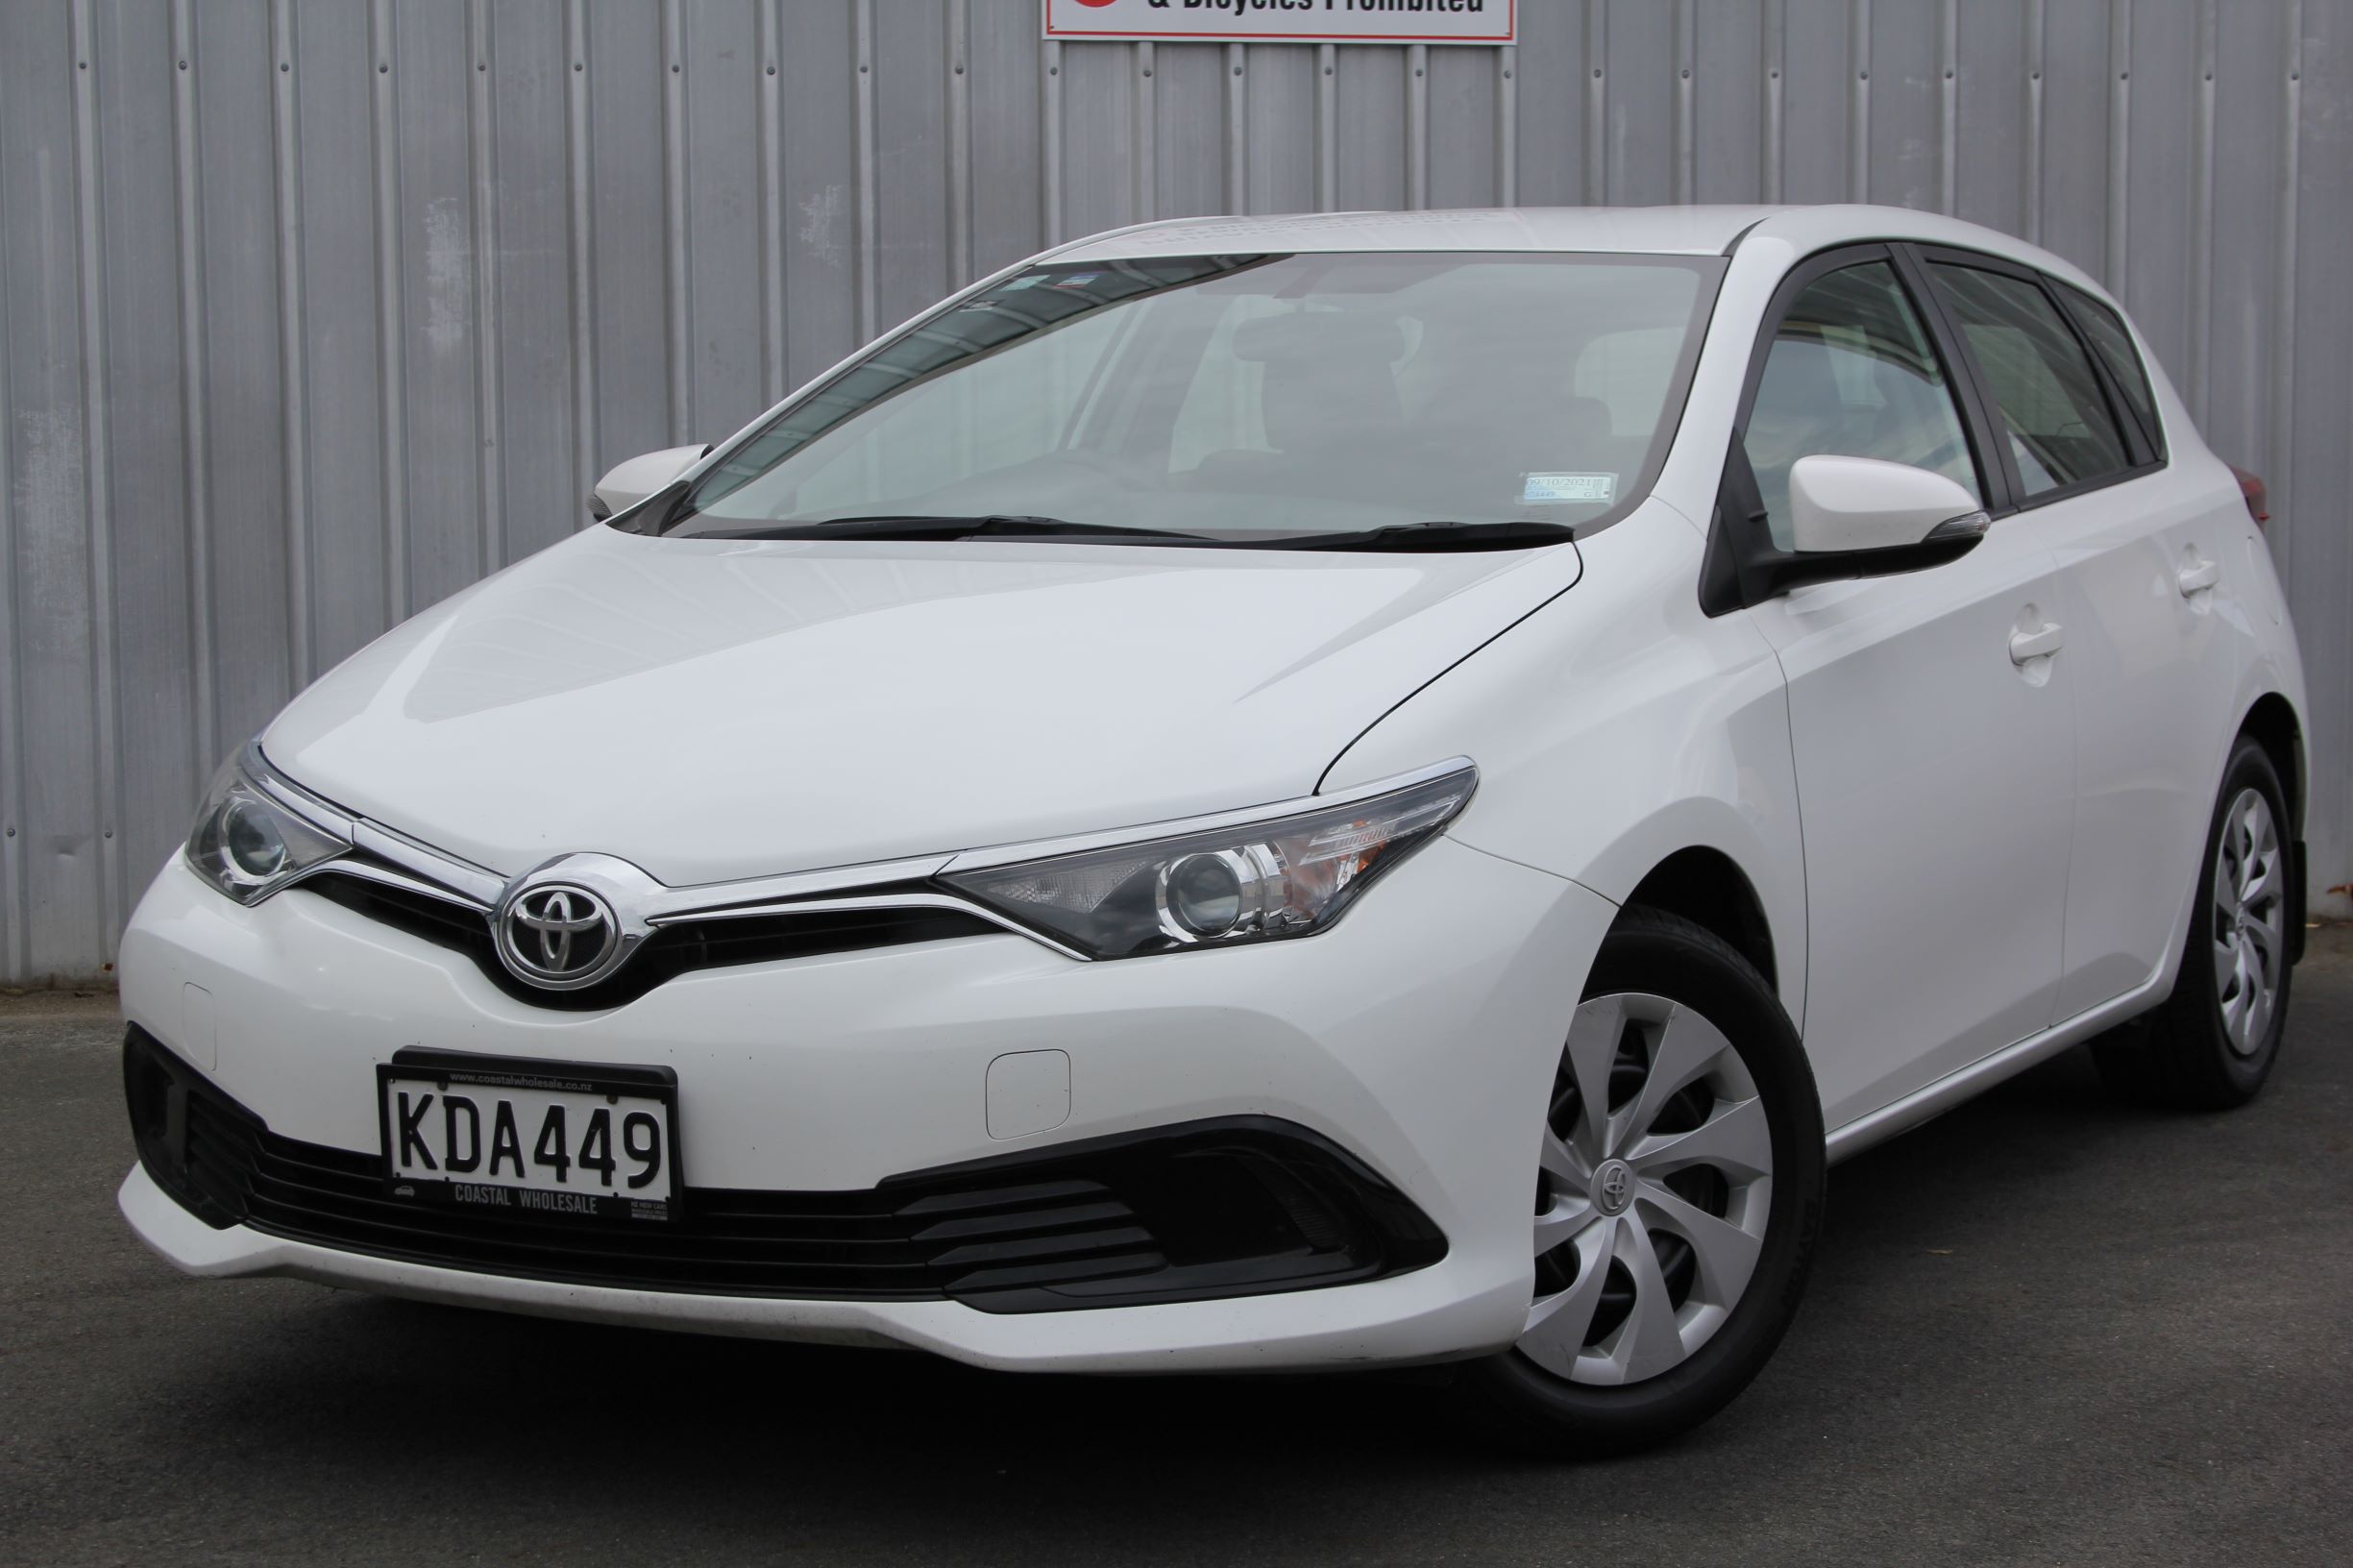 Toyota Corolla 2017 for sale in Auckland